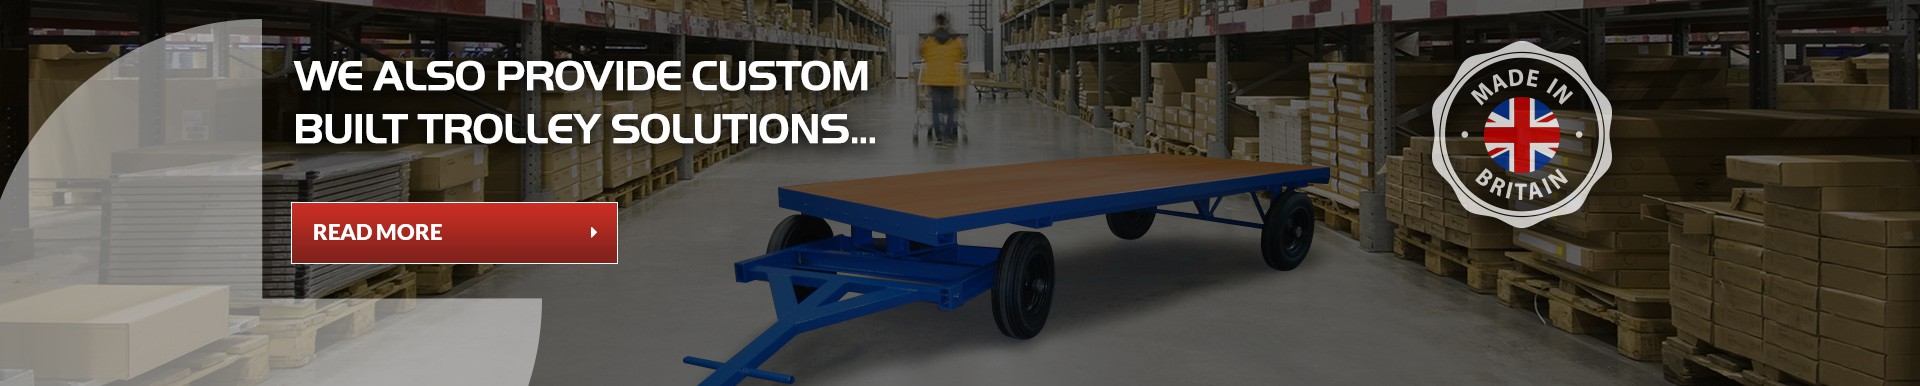 We Can Provide Custom Built Trolley Solutions - View Our Gallery